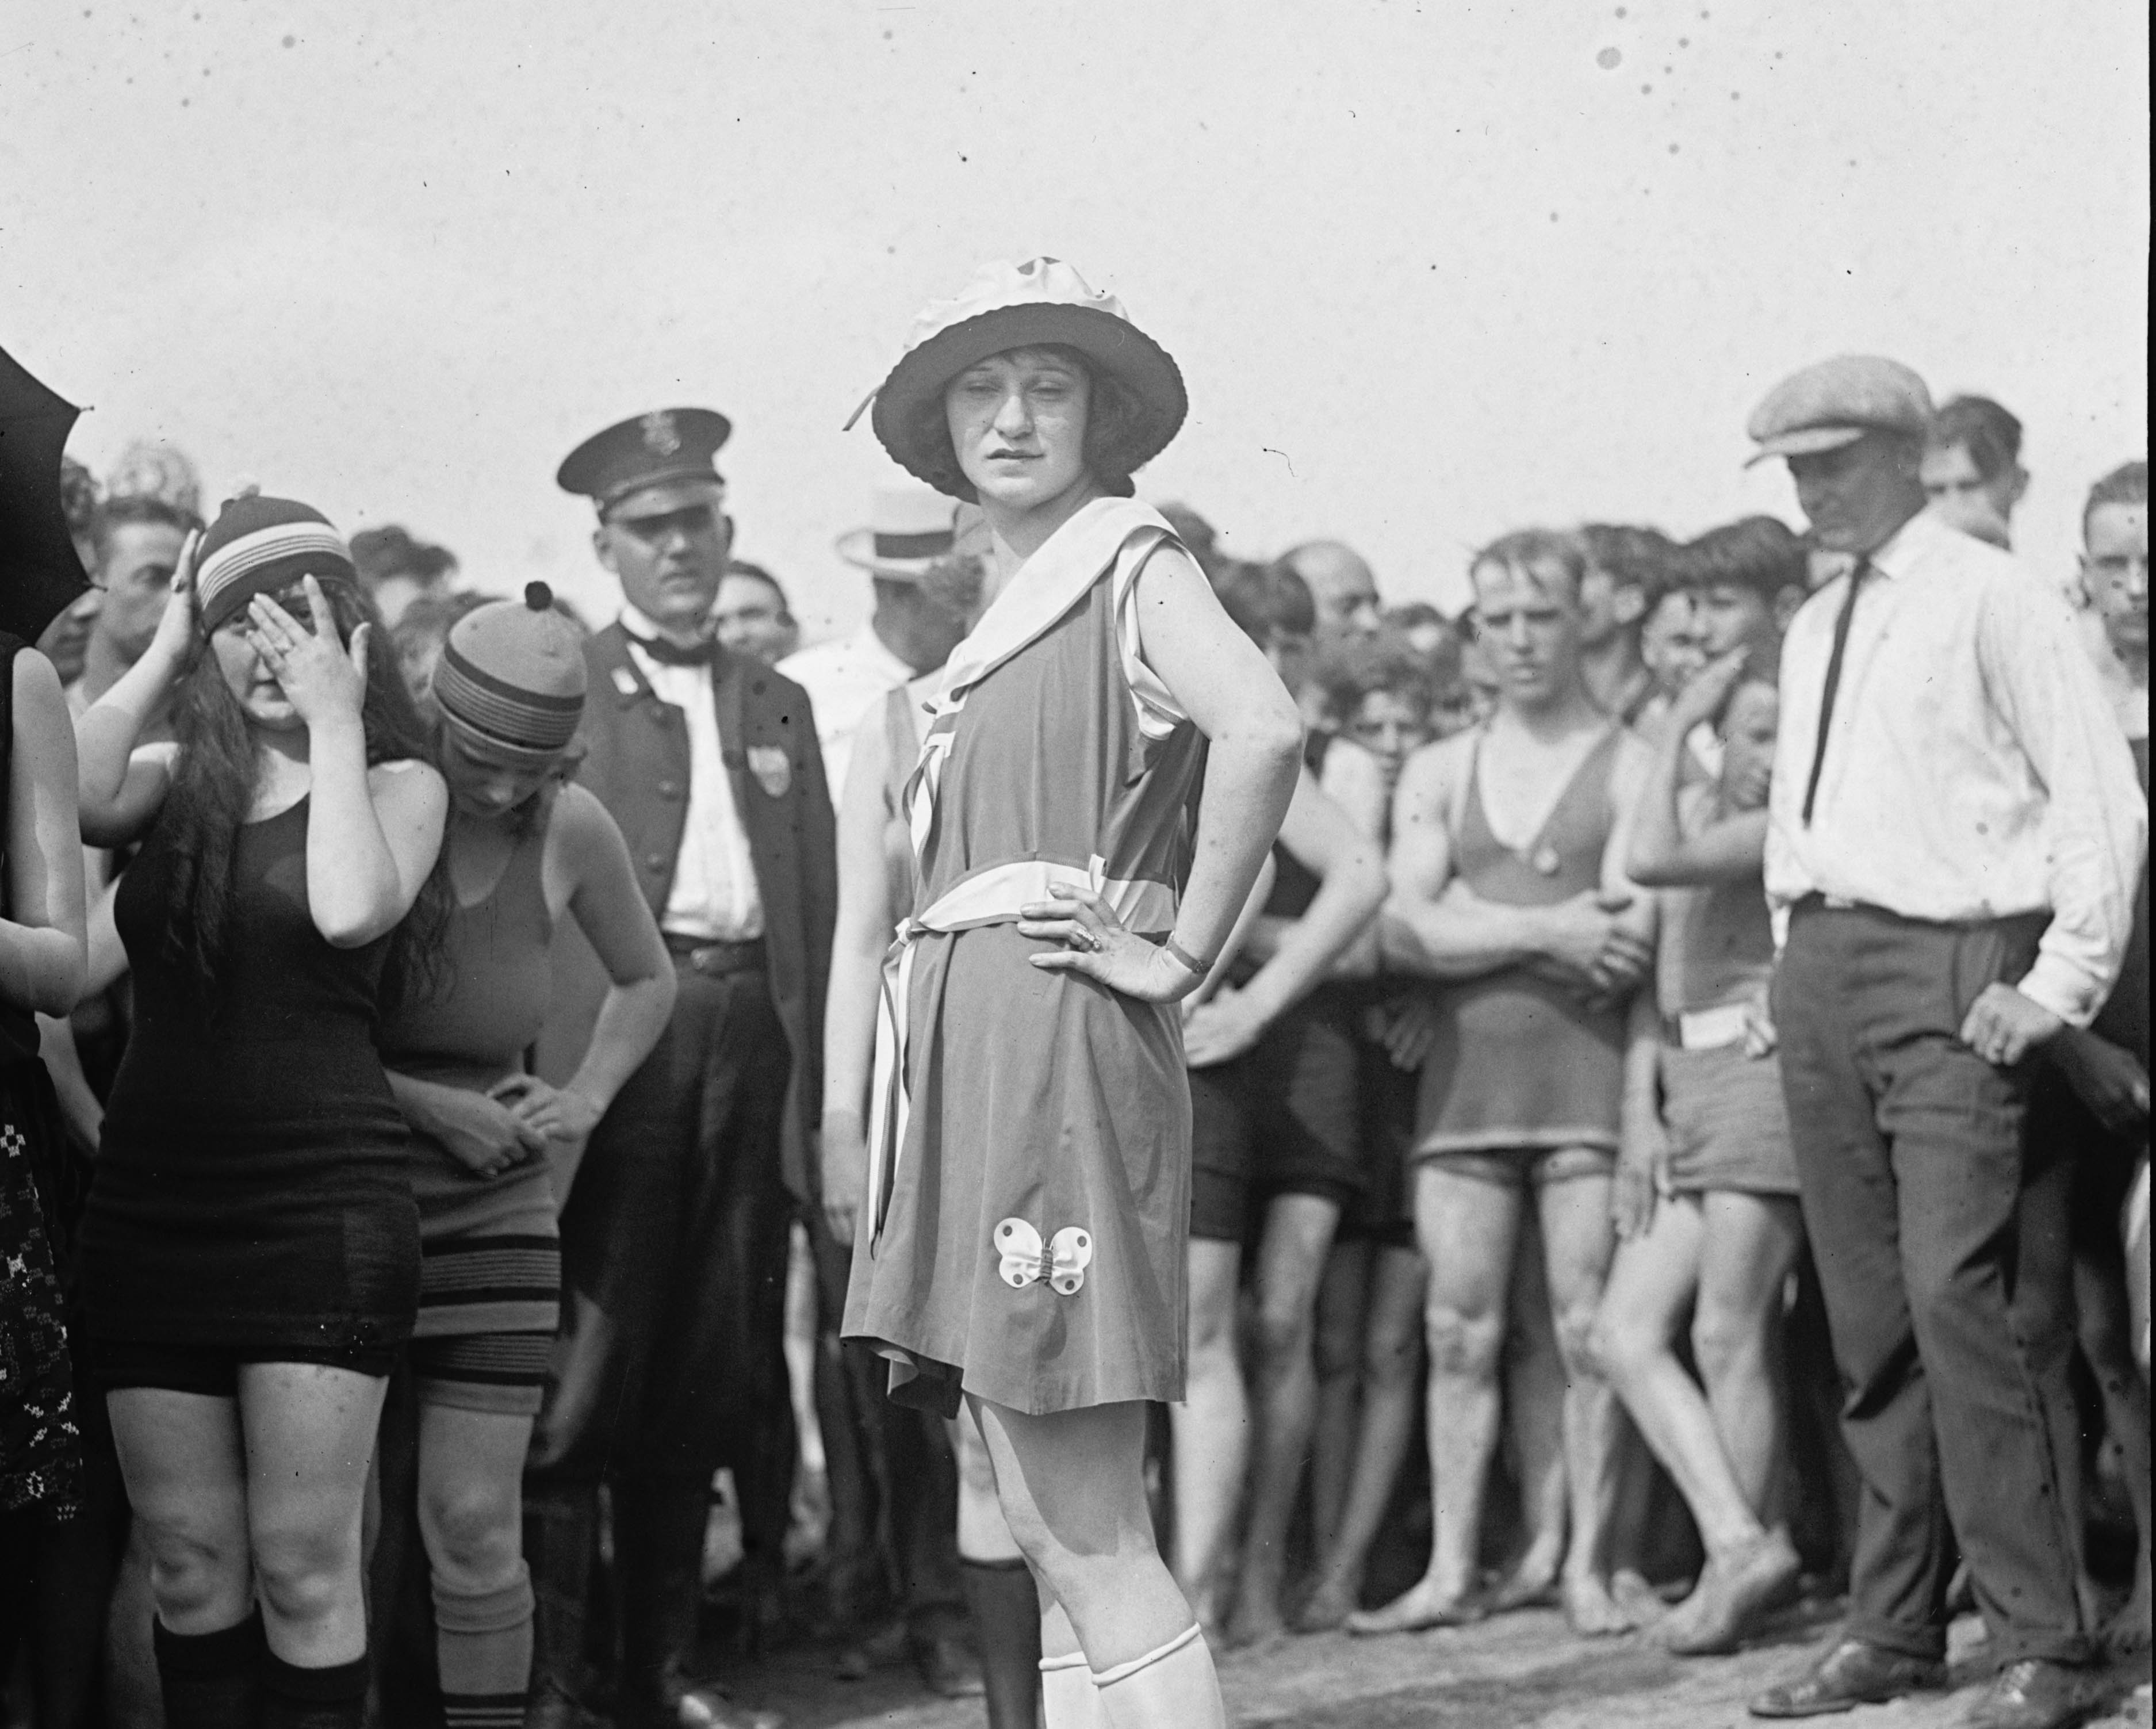 A Look at Beach Days Through the Ages (in Pictures)